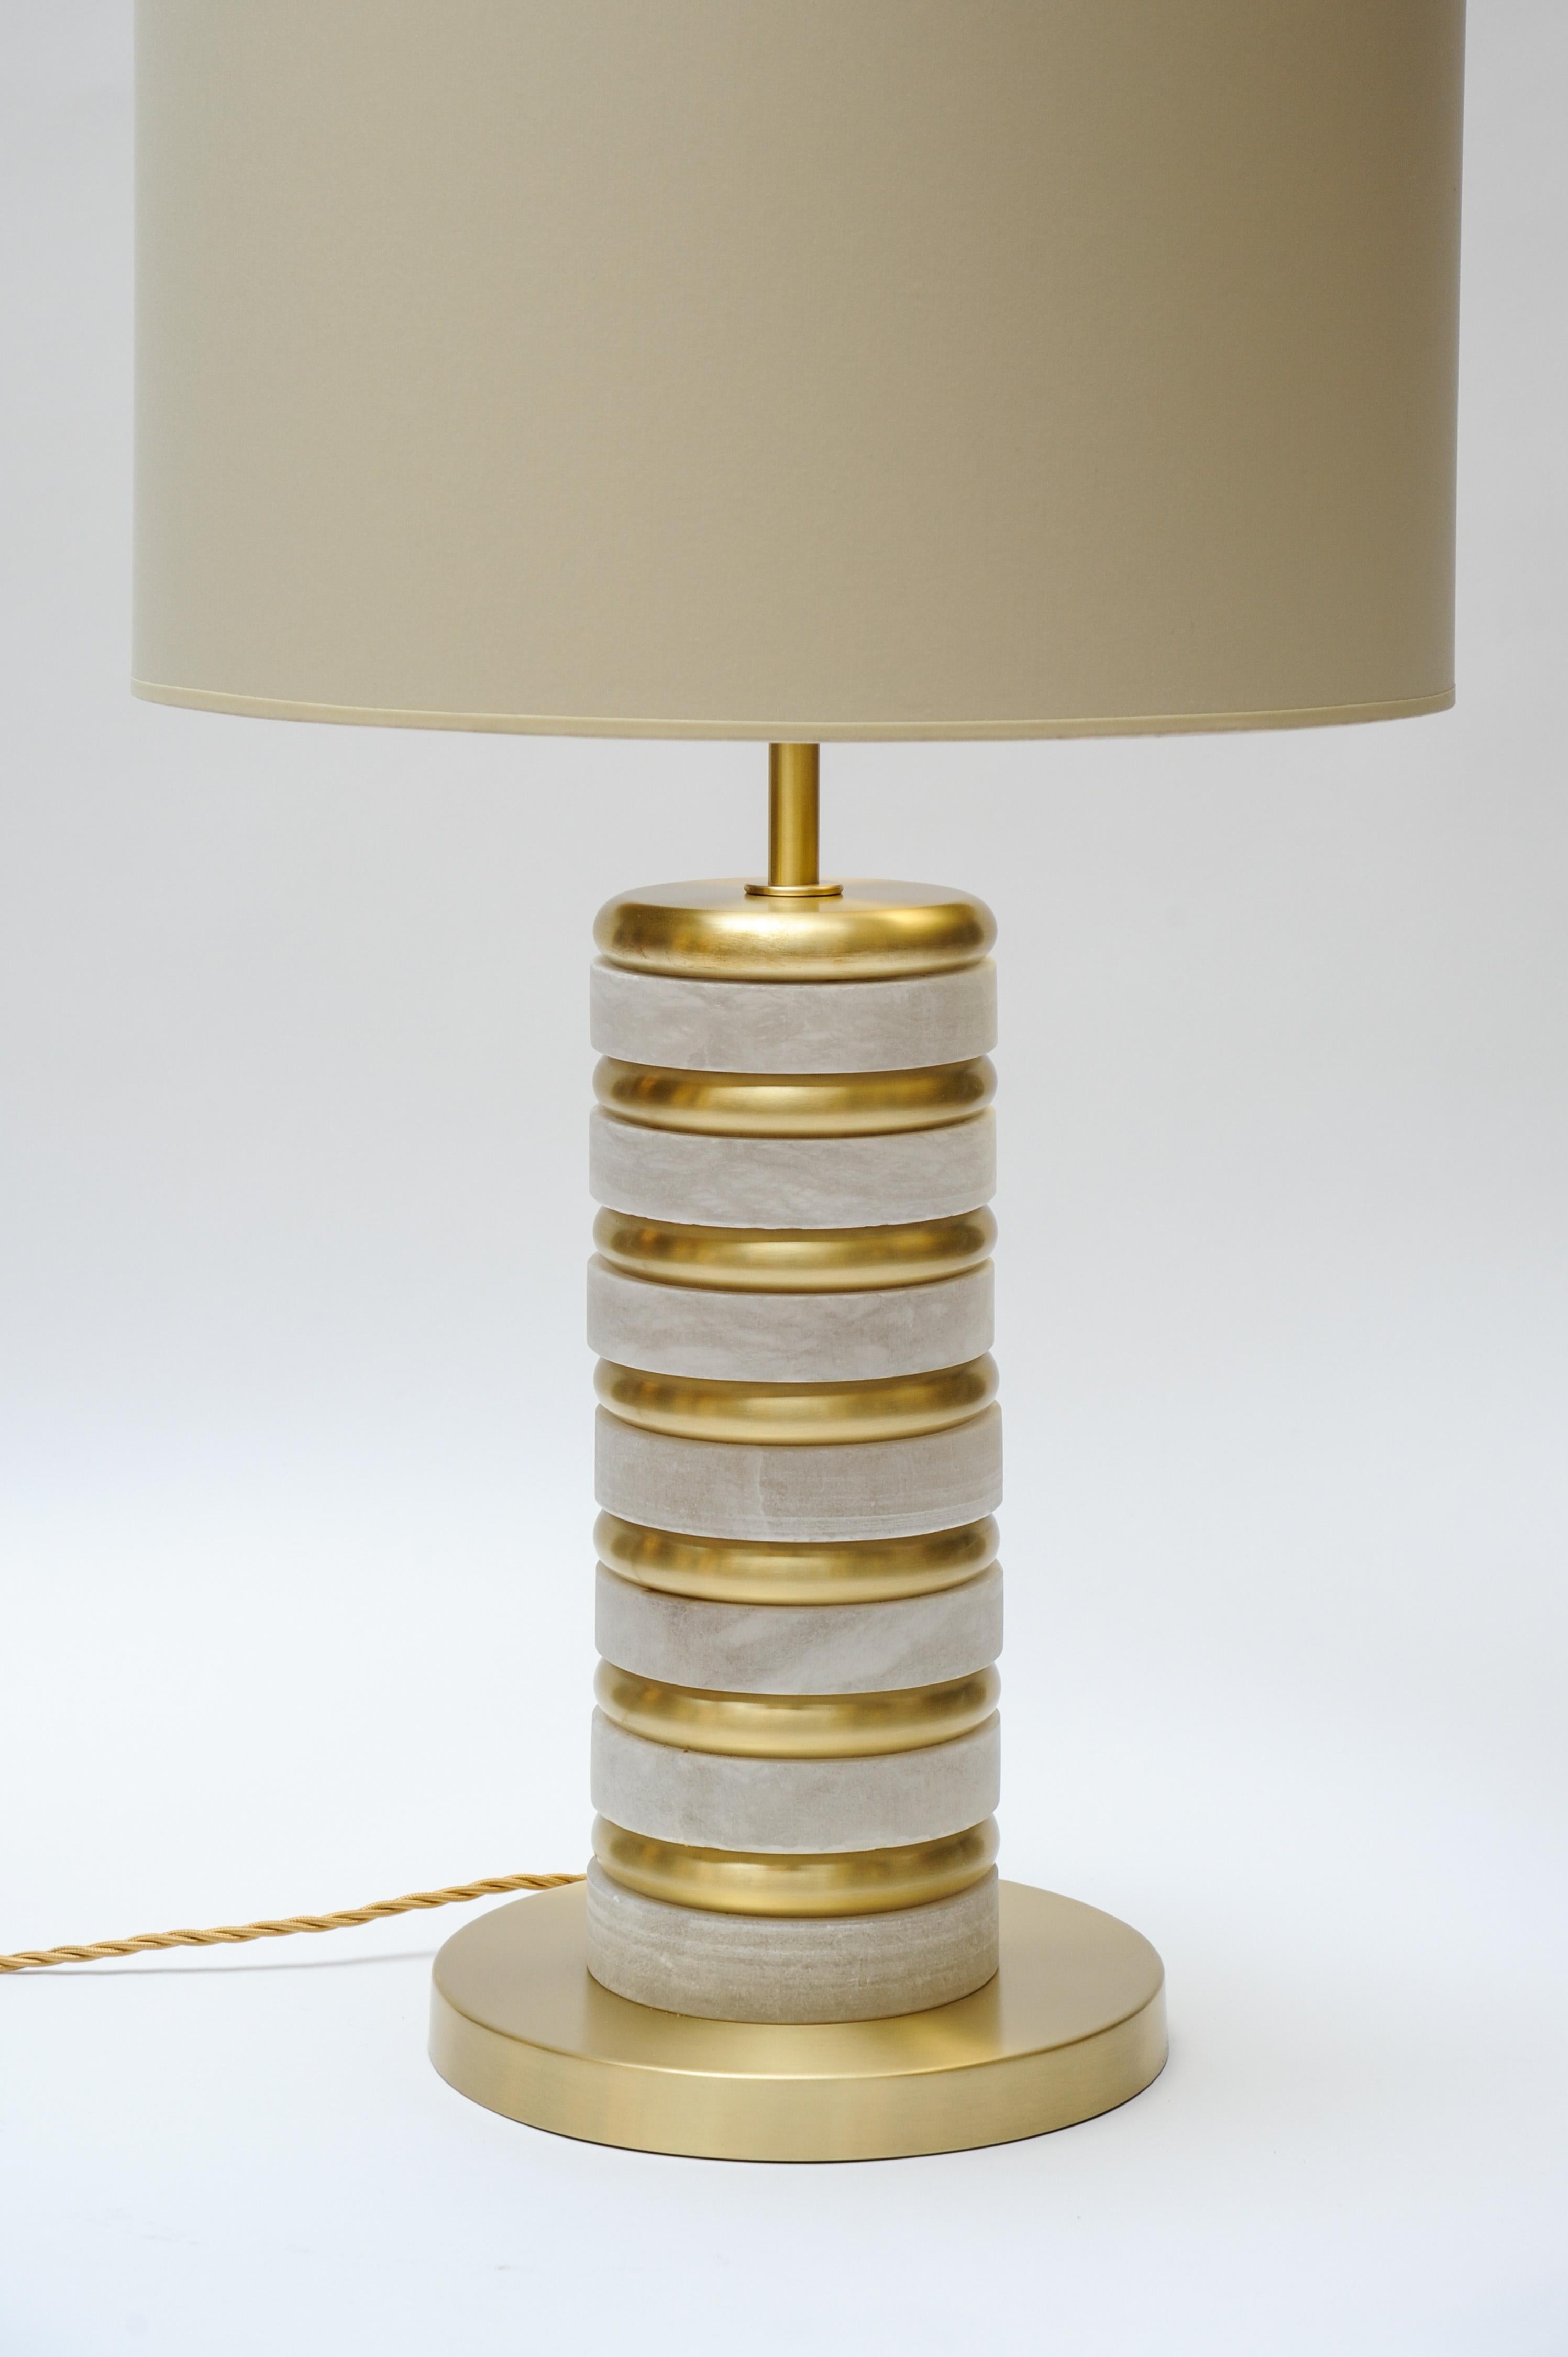 Pair of table lamps made of stacked thick alabaster and brass rings.